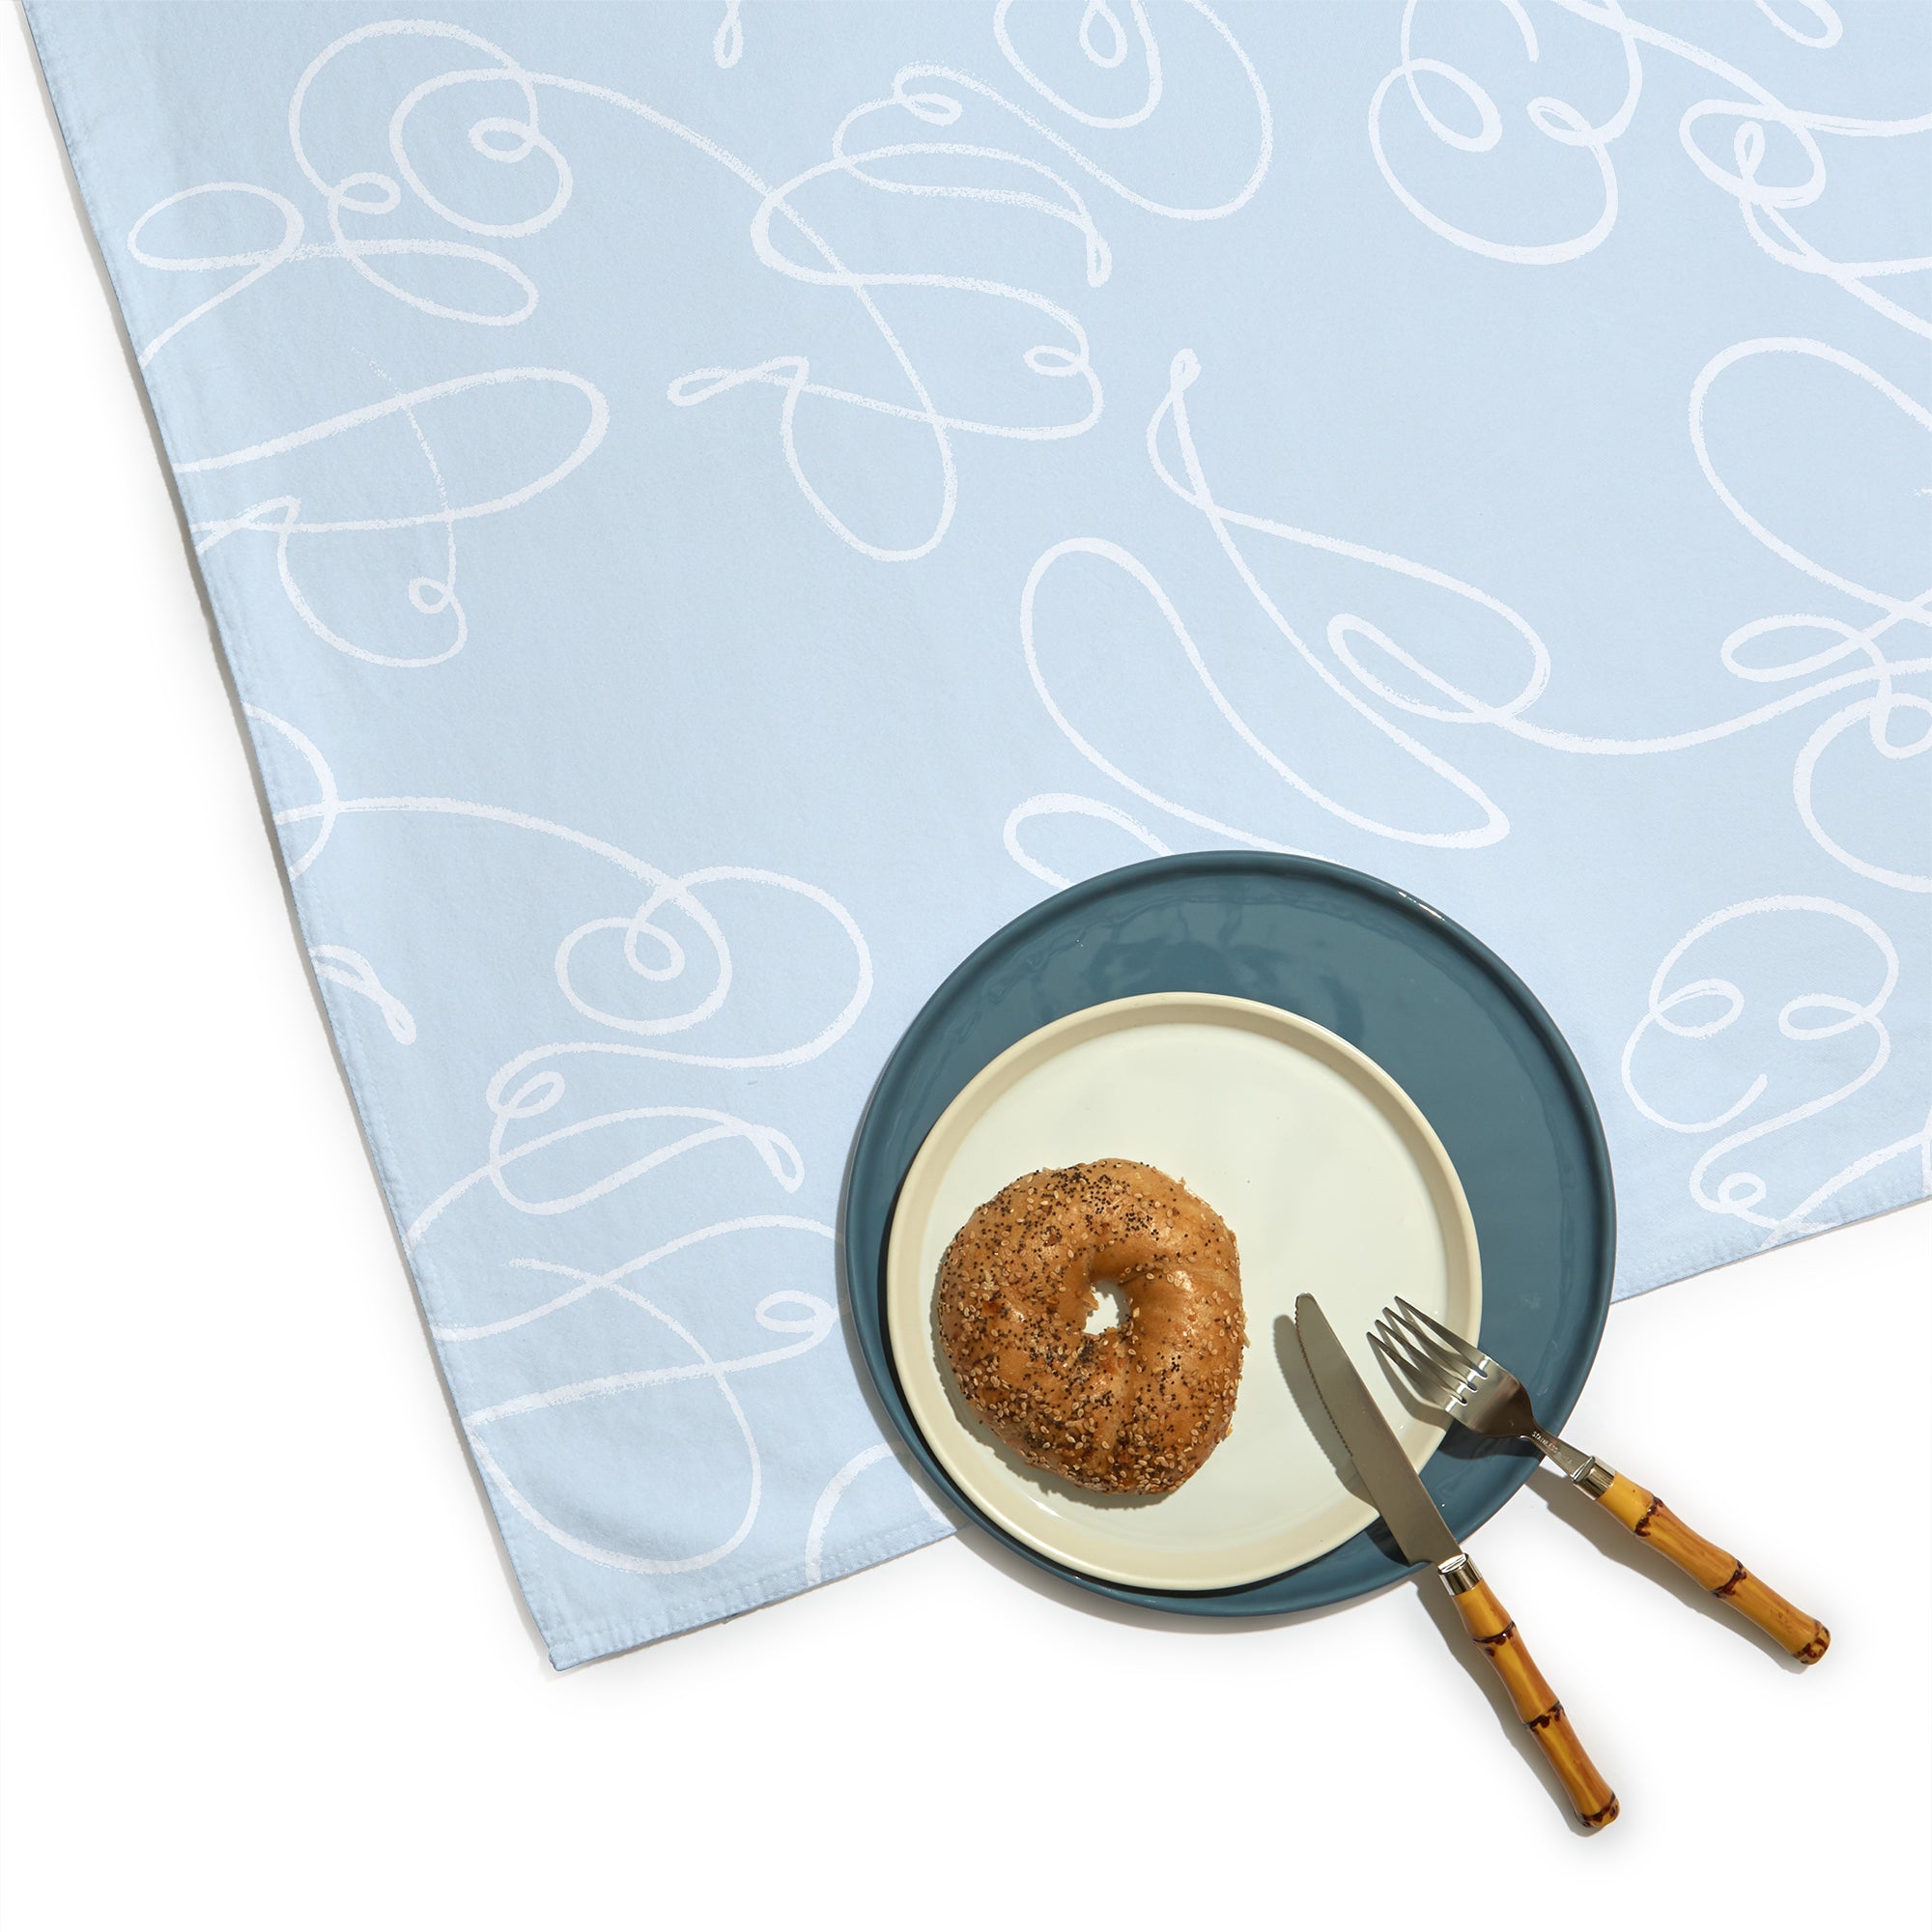 Corner Close-Up of Powder Blue Abstract Printed Table Cloth with bagel on white plate on blue plate with silverware